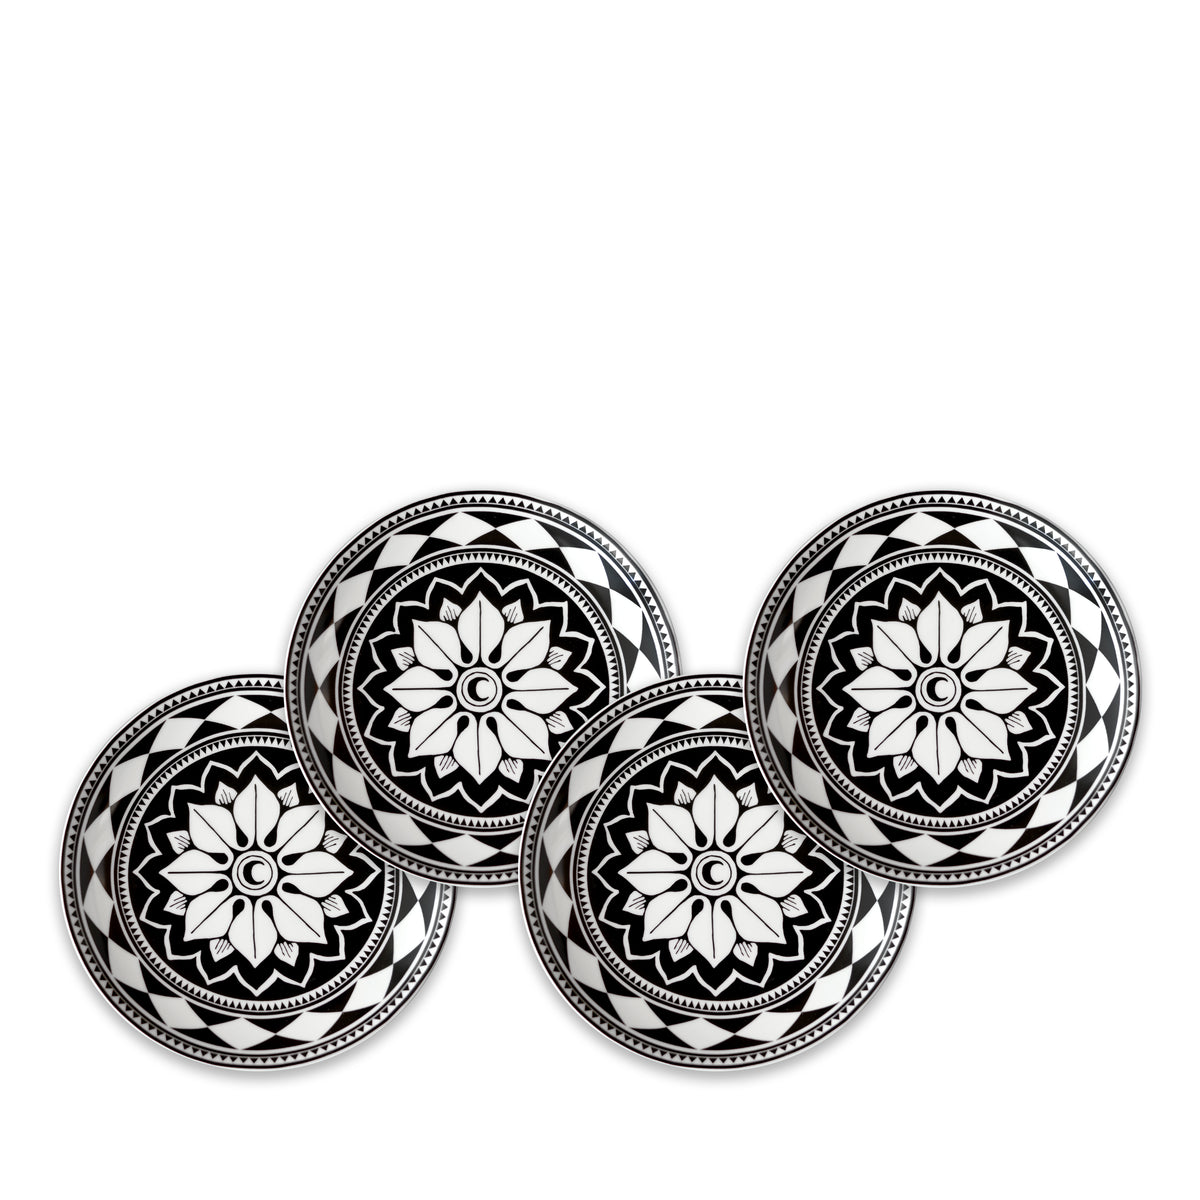 Fez Canapé Plates in Black and White High-Fired PorcelainBoxed Set/4 - Caskata